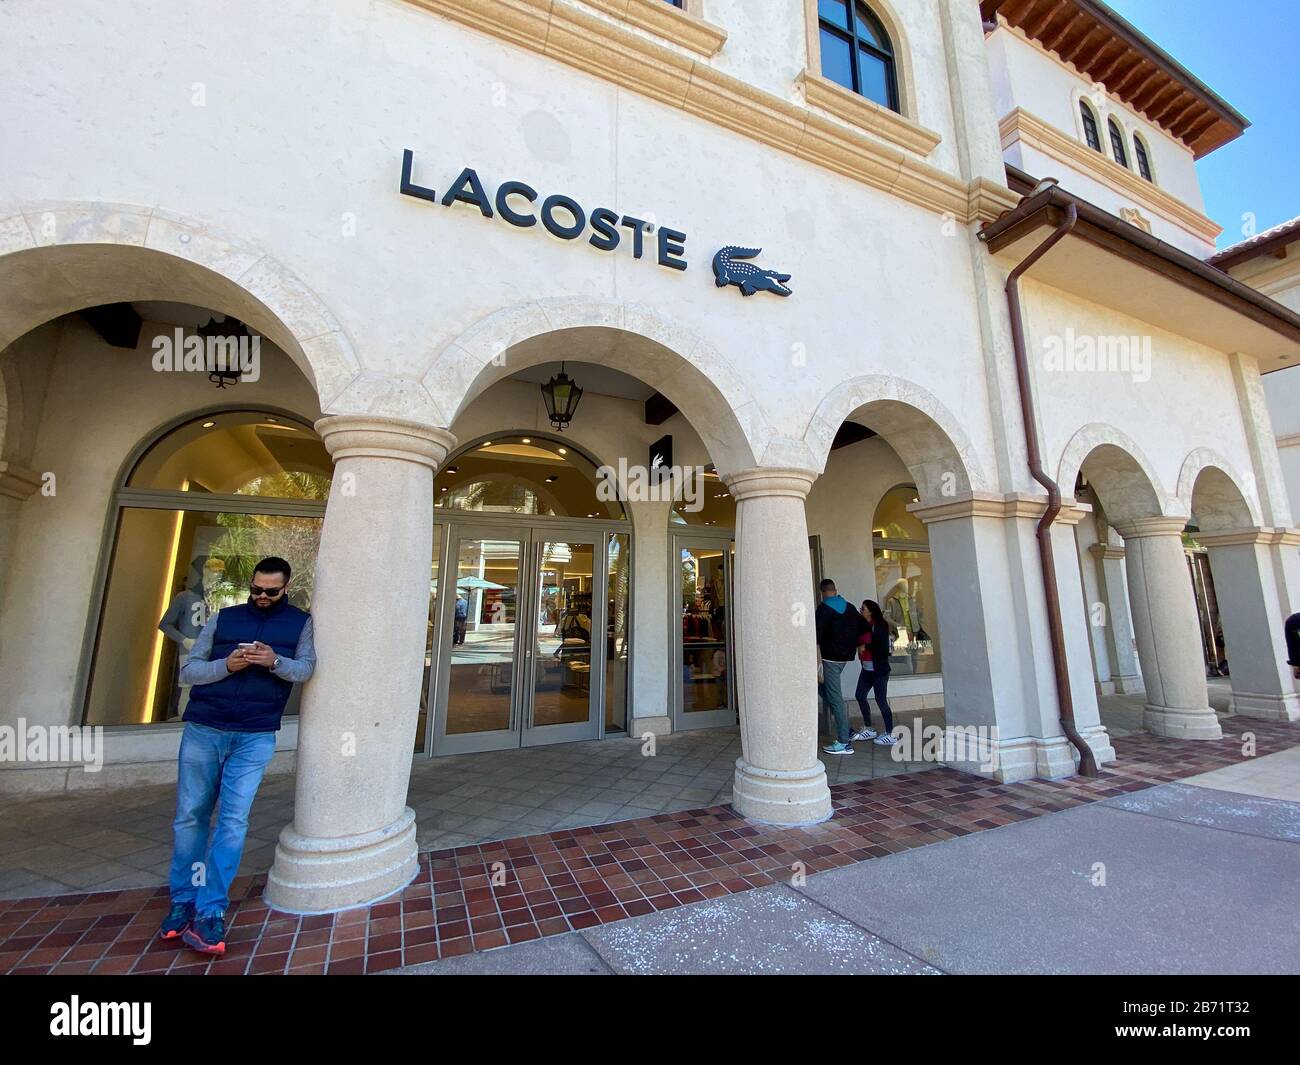 Orlando, FL/USA-2/29/20: A Lacoste clothing retail store at an outdoor mall  Stock Photo - Alamy